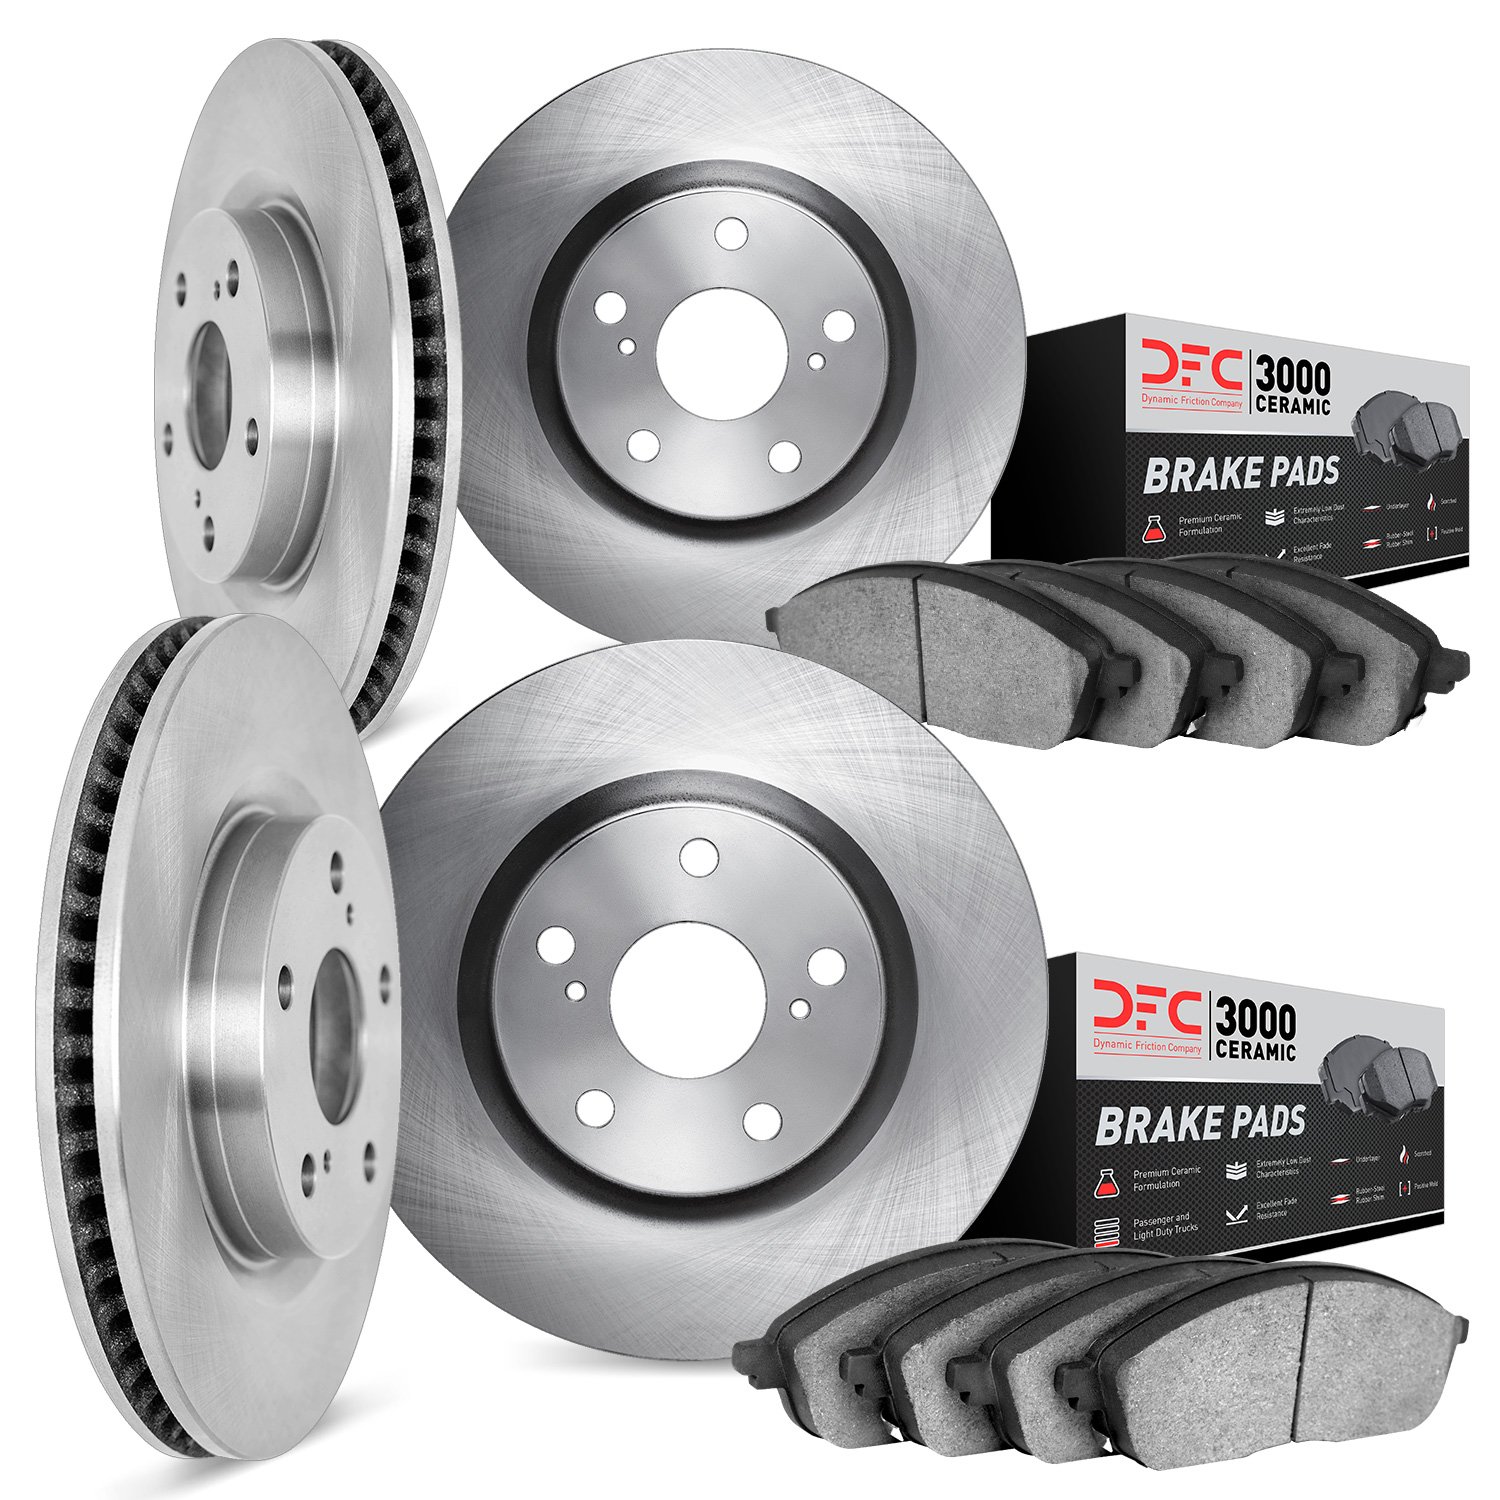 6304-31072 Brake Rotors with 3000-Series Ceramic Brake Pads Kit, 2007-2018 BMW, Position: Front and Rear